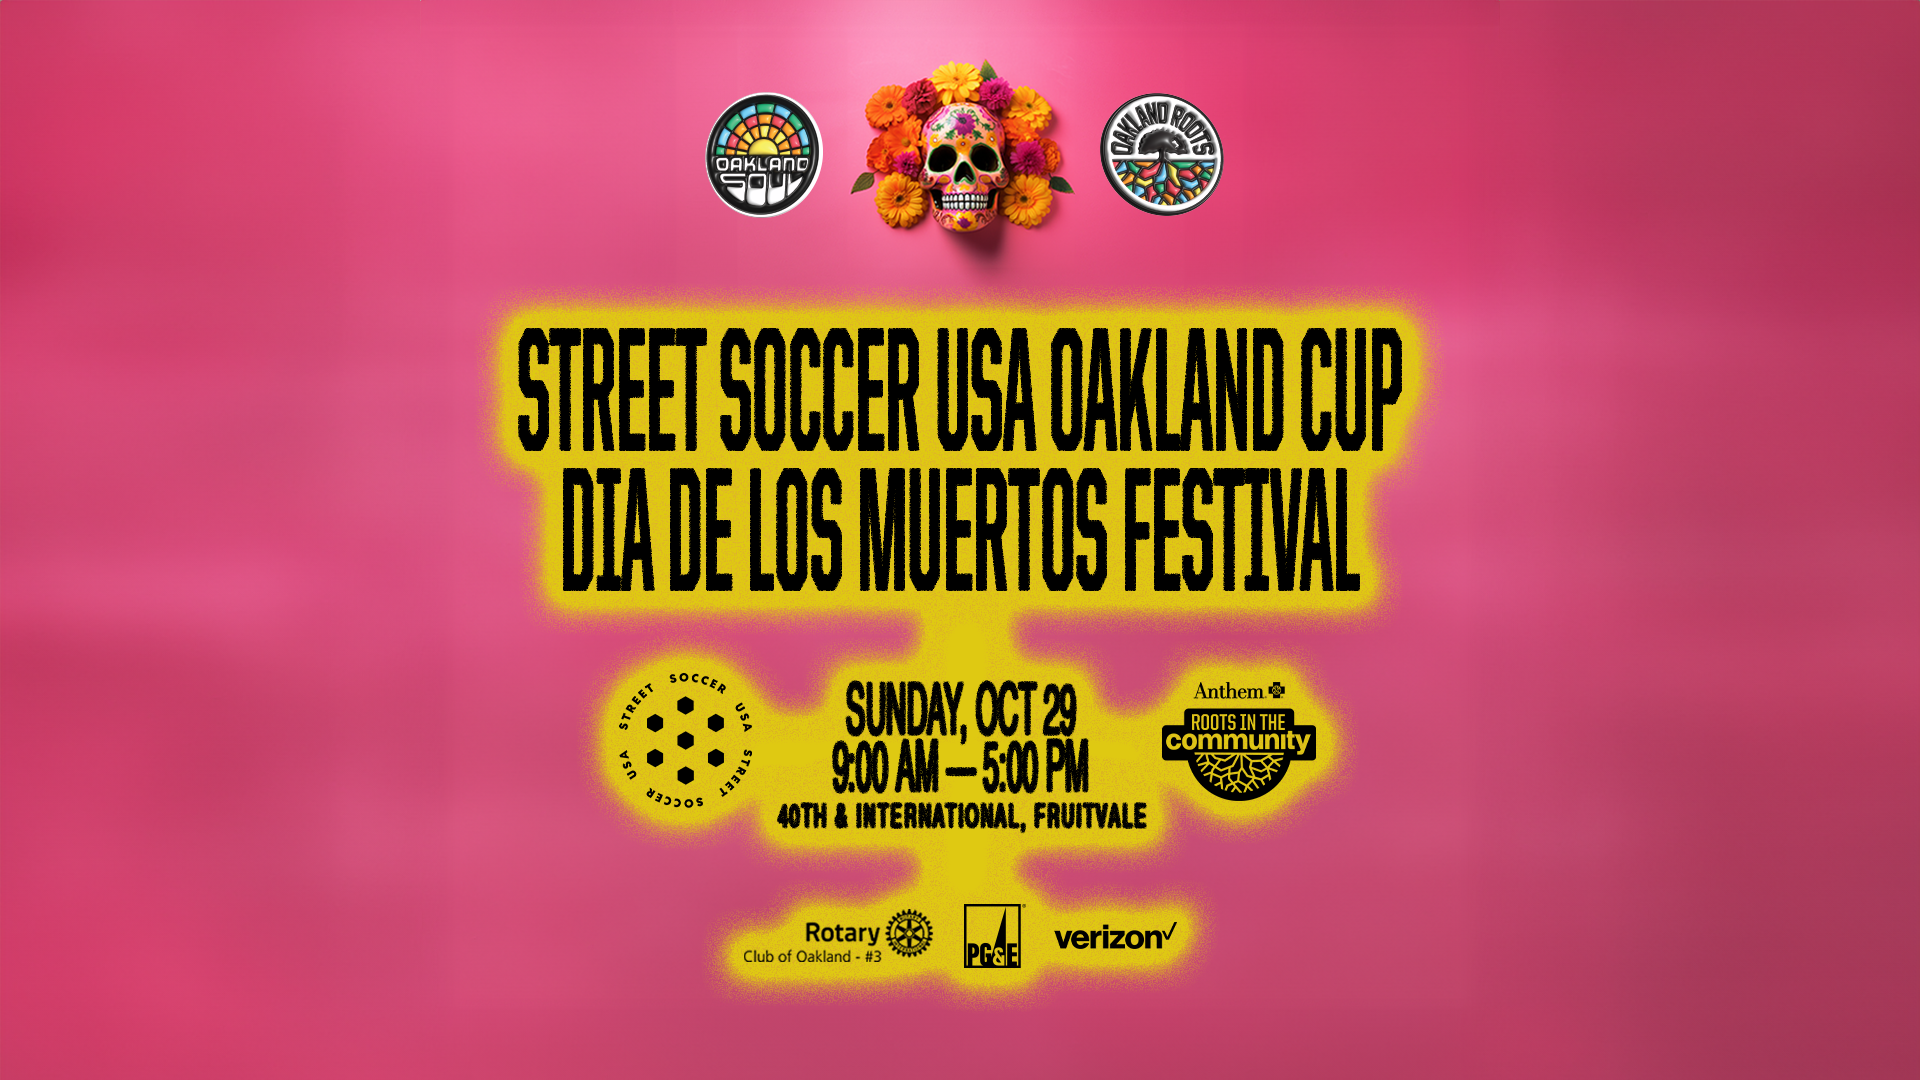 Street Soccer USA and Oakland Roots & Soul Sports Club announce 3rd Annual Oakland Cup At Dia de los Muertos Festival